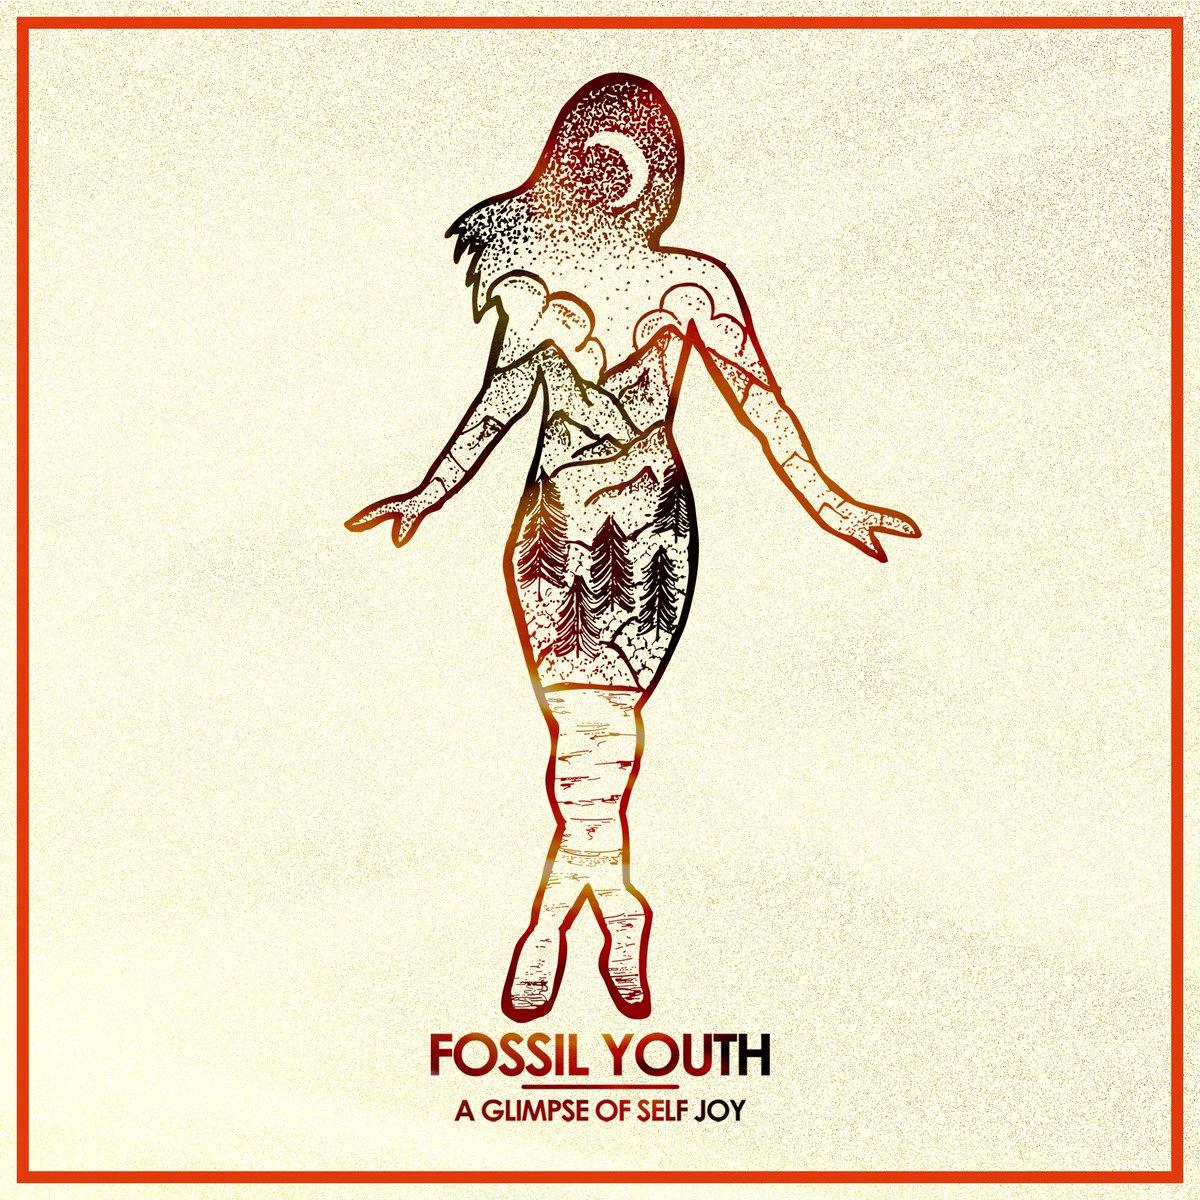 Fossil Youth - P. Cummings (3)